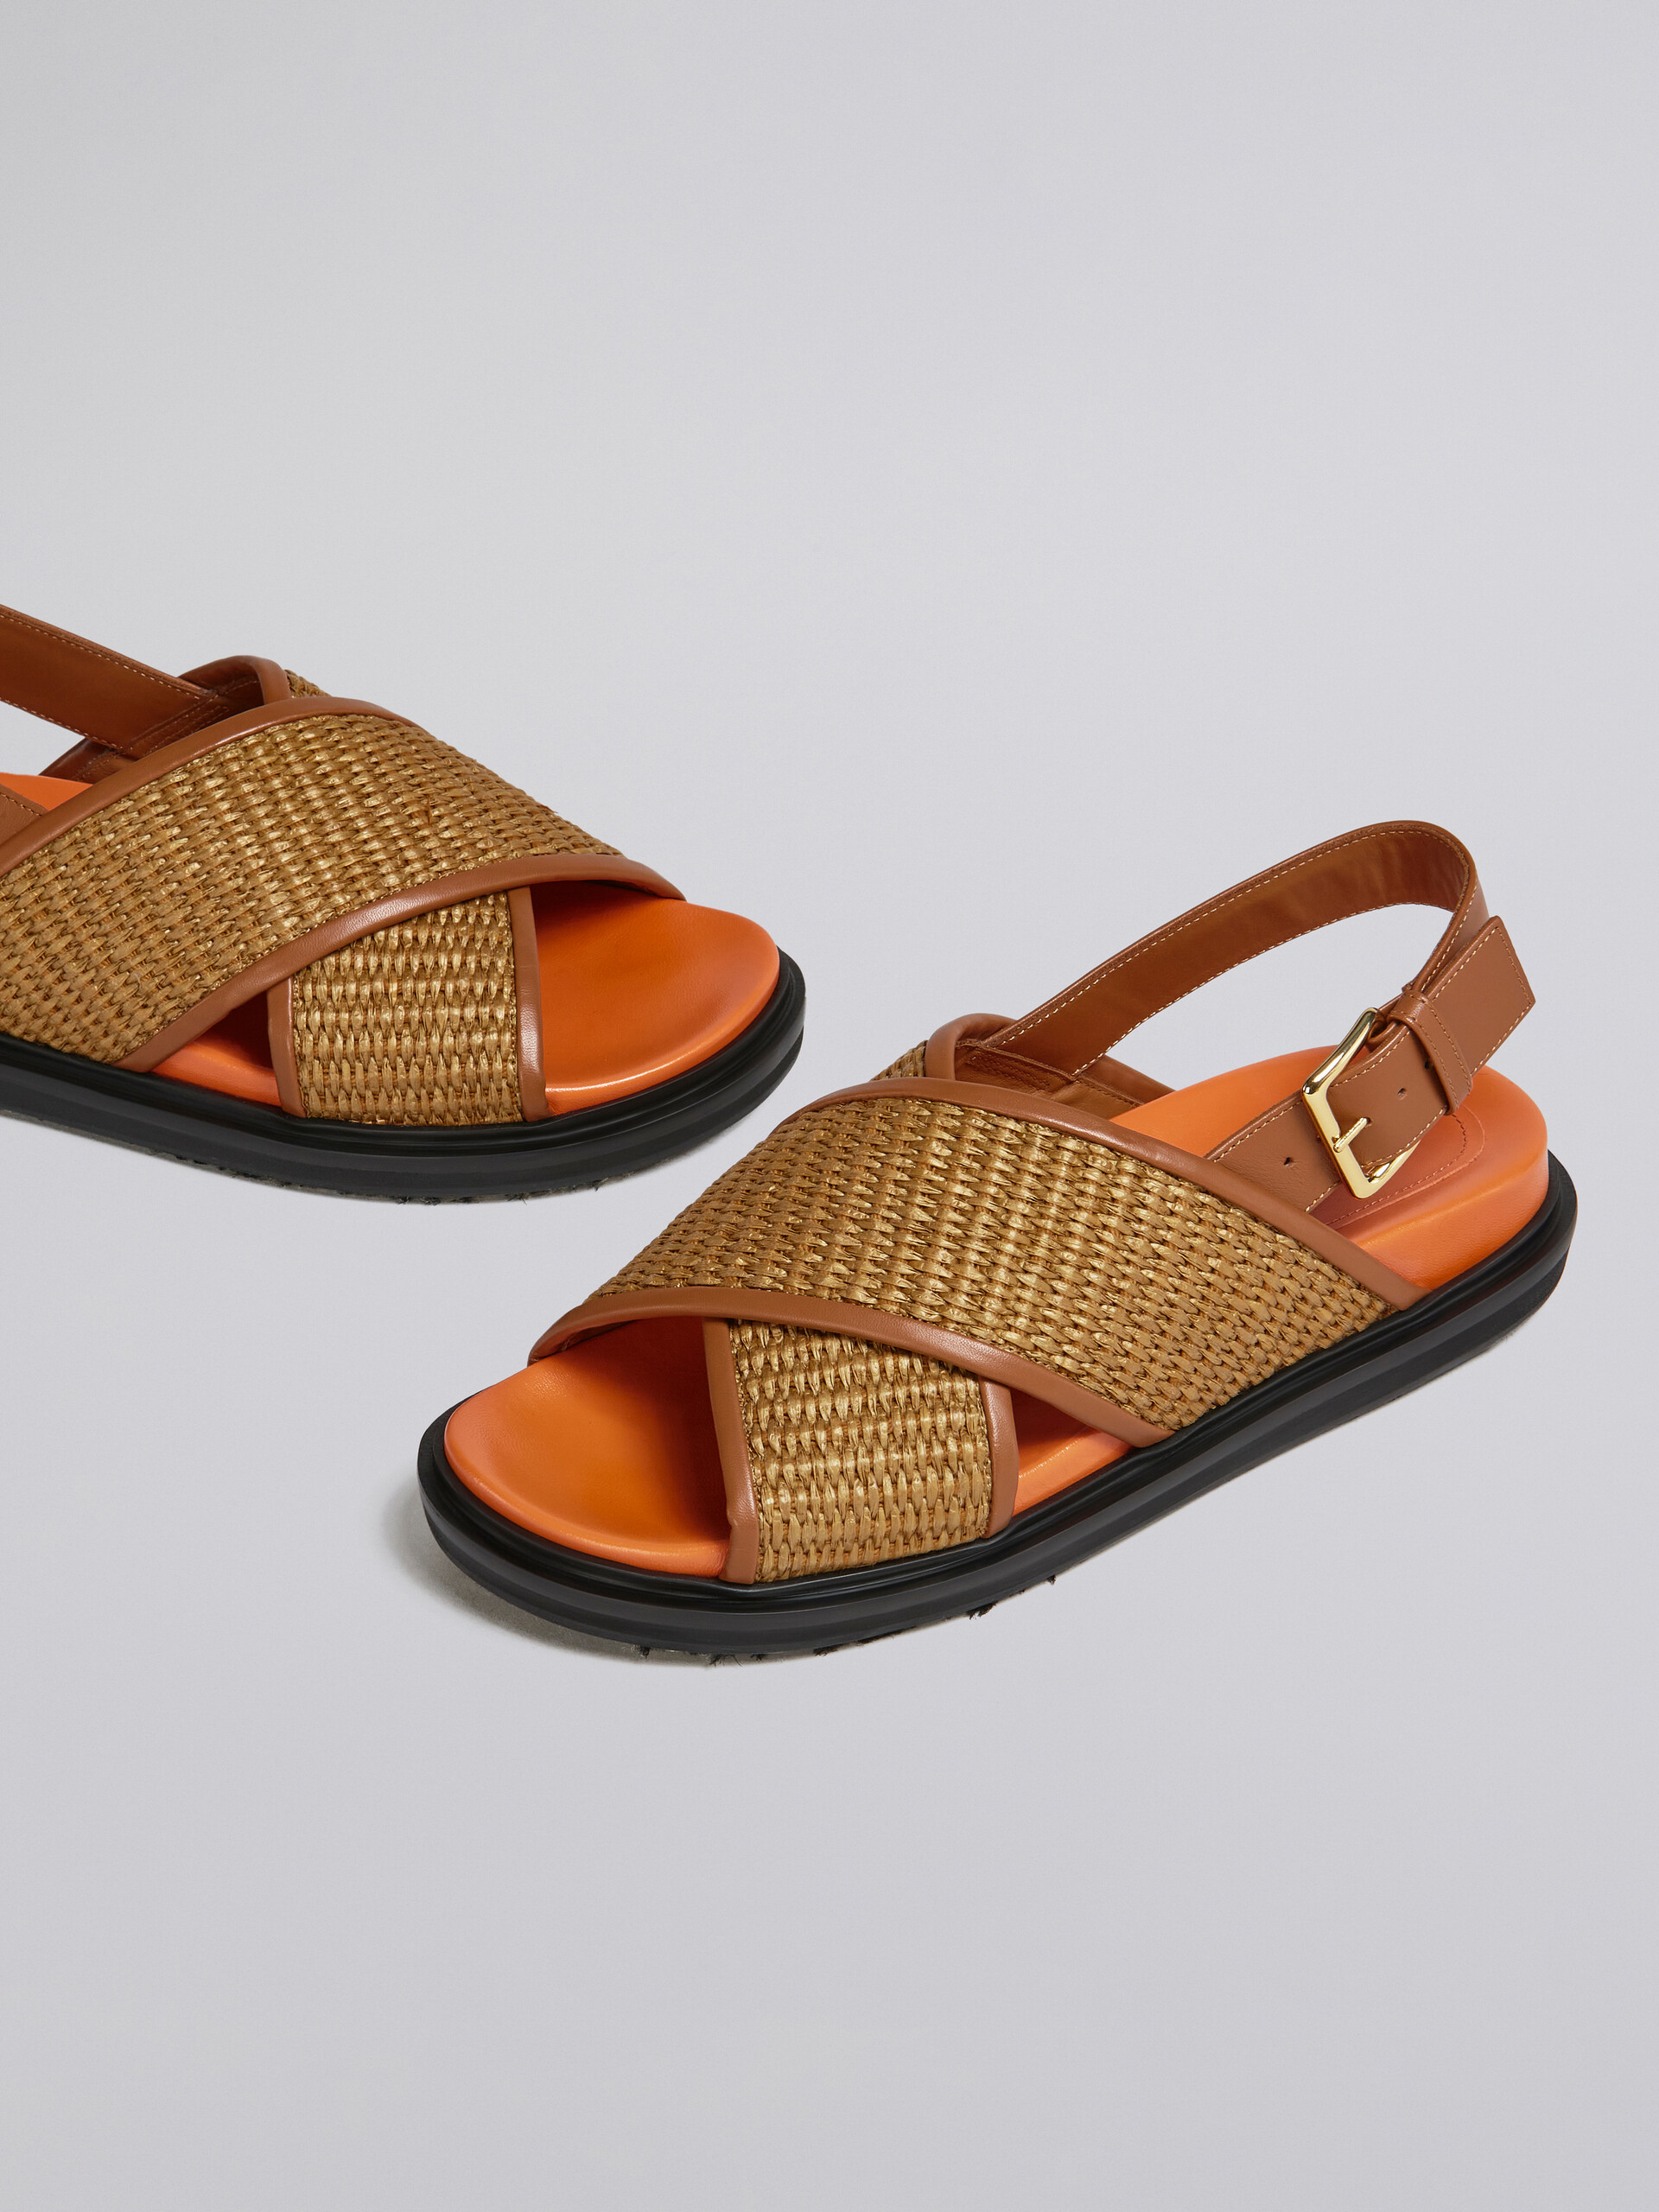 Brown raffia and leather fussbett - Sandals - Image 5